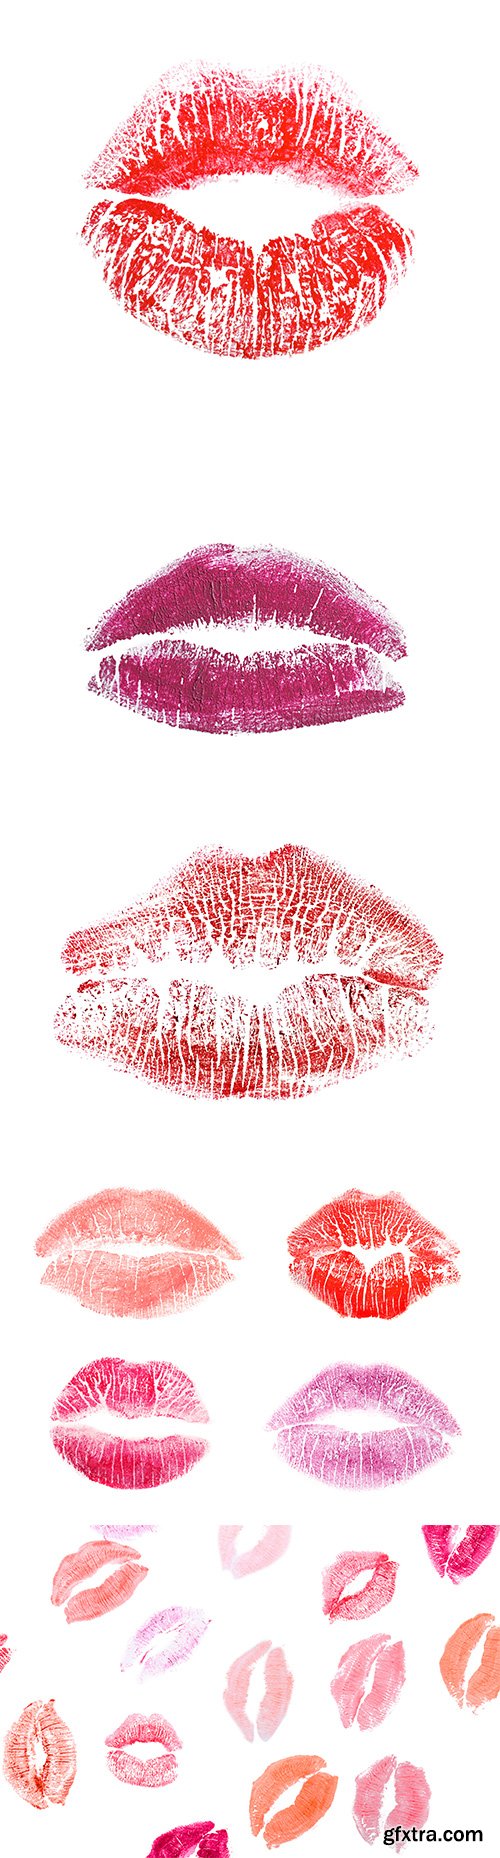 Colorful Lipstick Kiss Mark Isolated - 13xJPGs